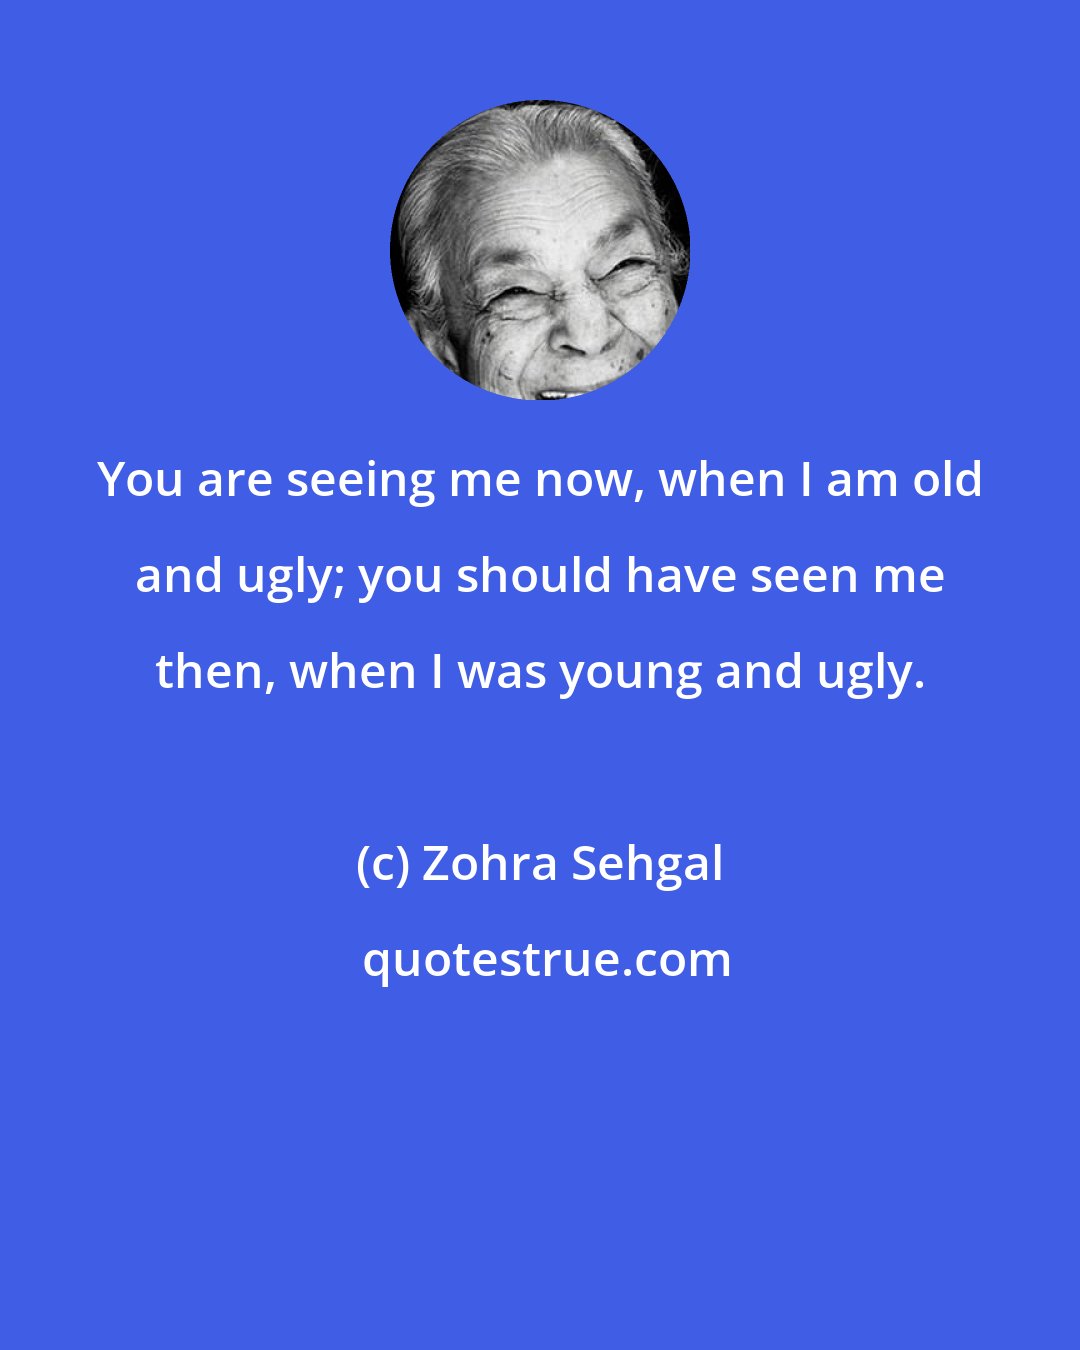 Zohra Sehgal: You are seeing me now, when I am old and ugly; you should have seen me then, when I was young and ugly.